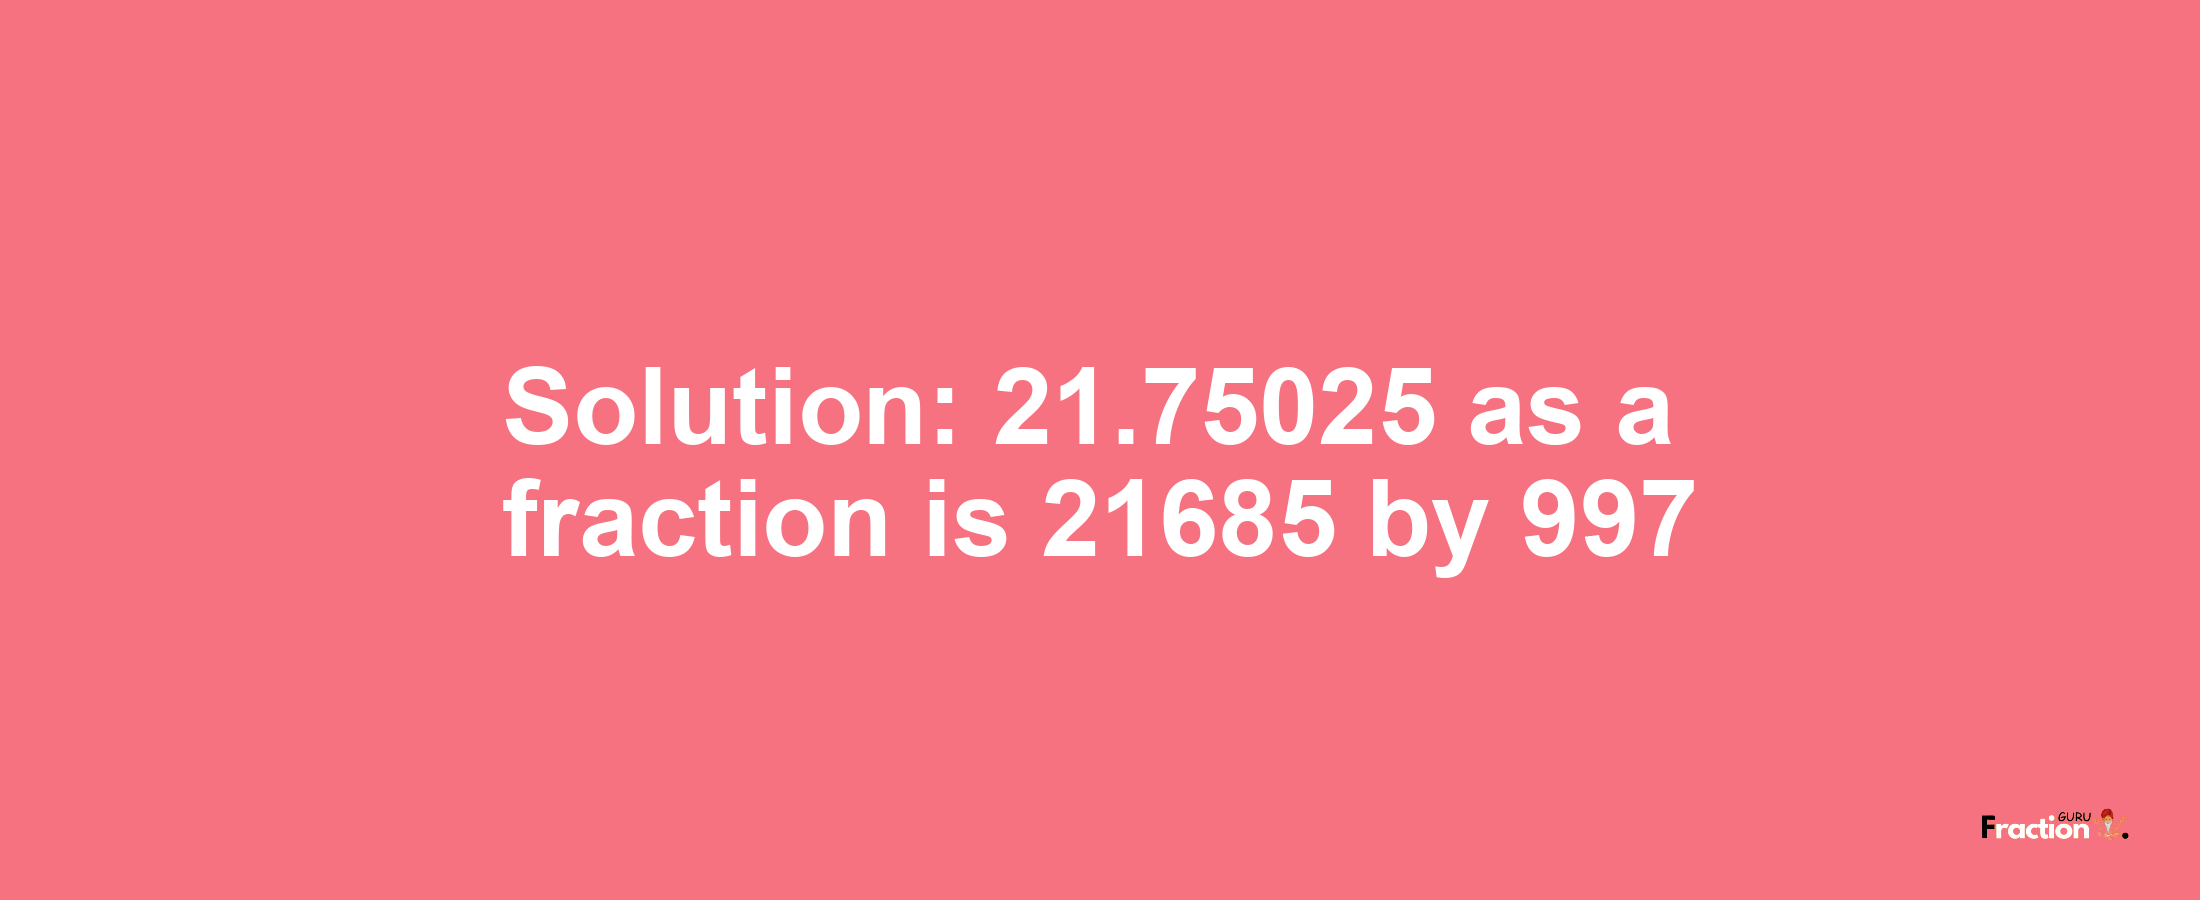 Solution:21.75025 as a fraction is 21685/997